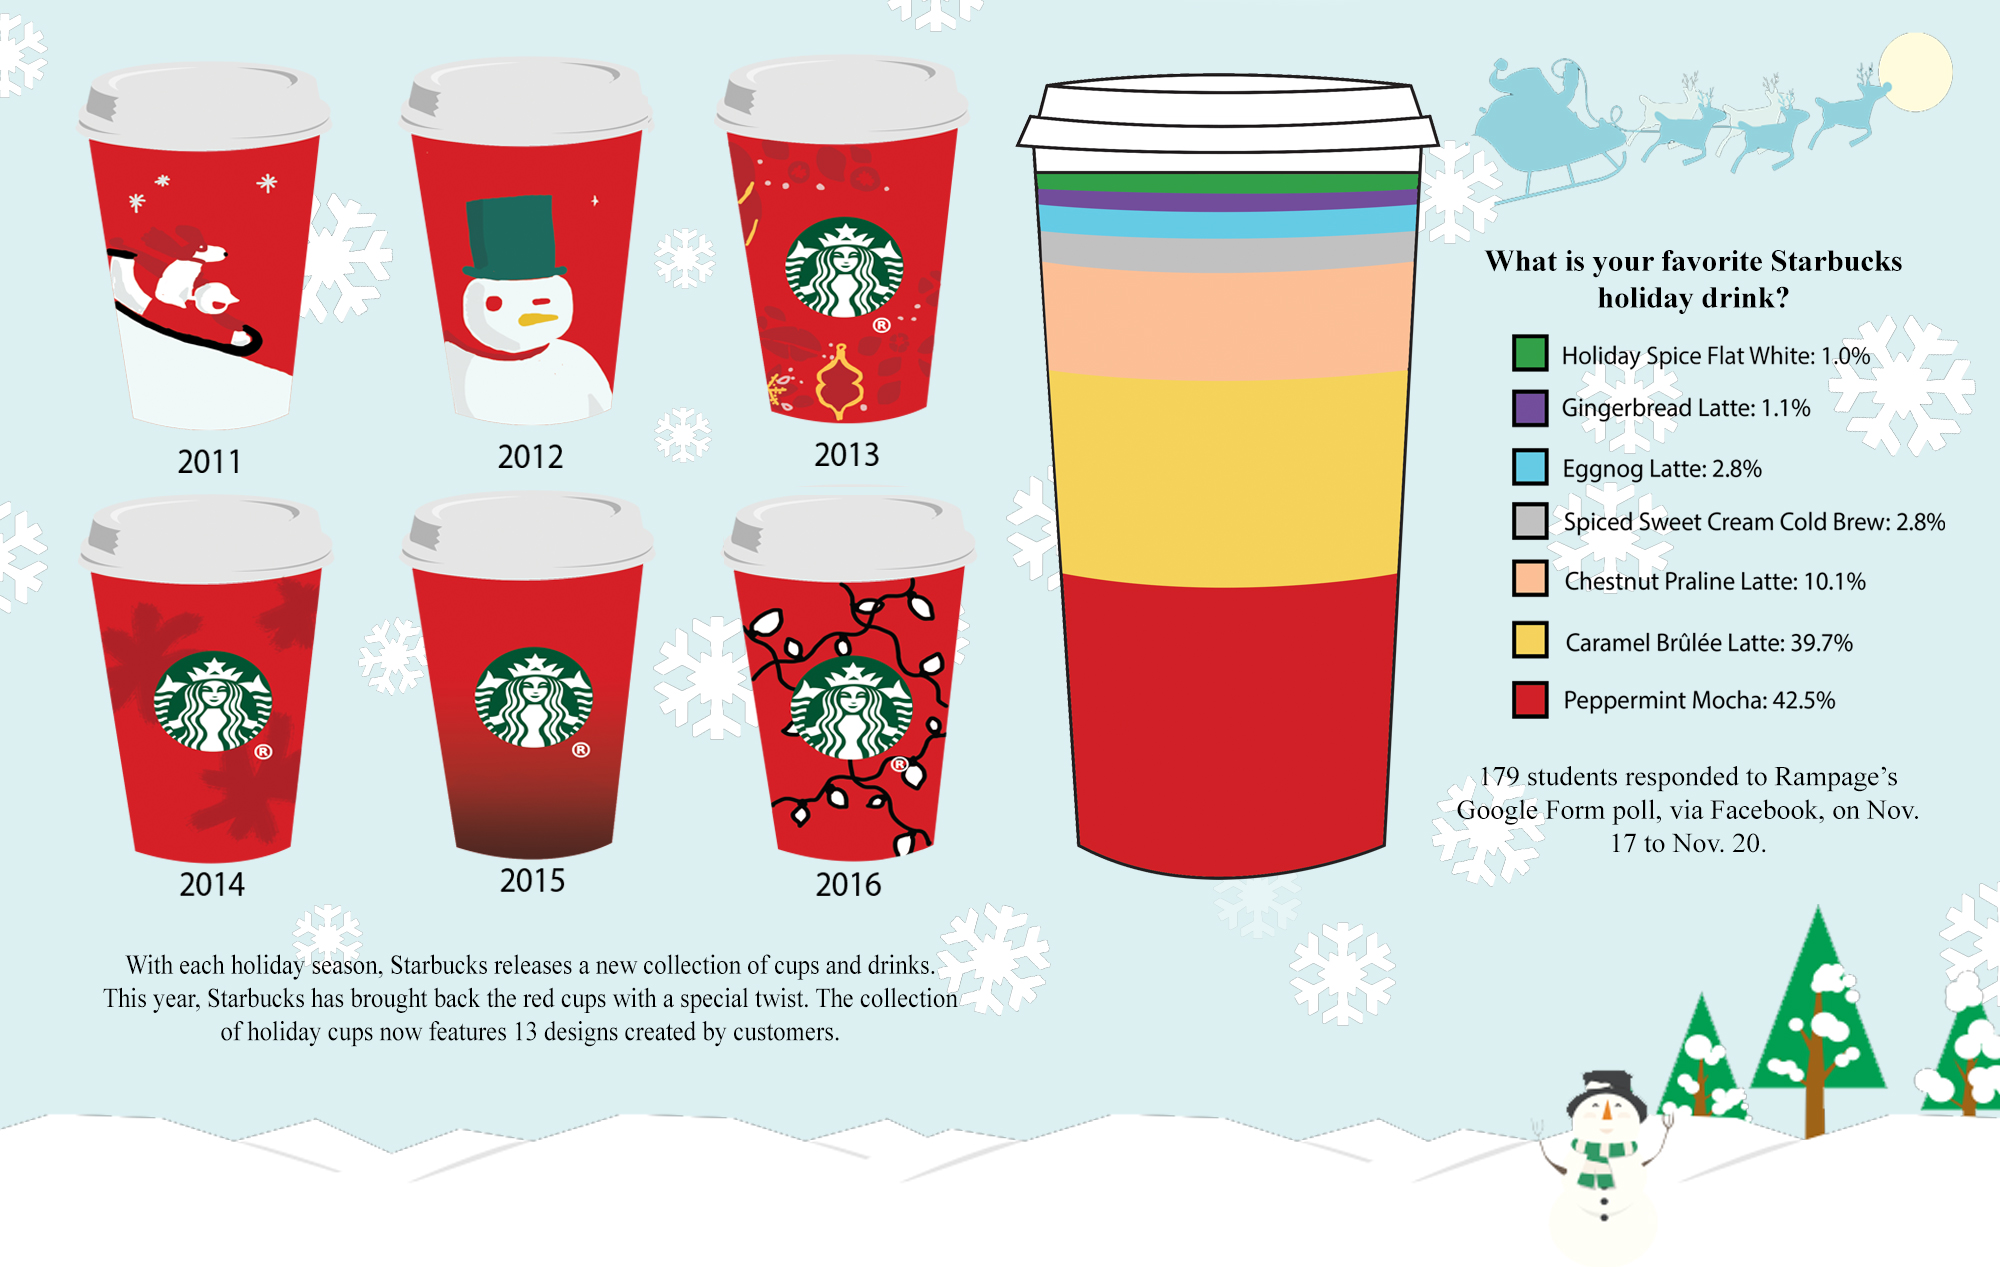 Brewing up a cup of Starbucks Christmas cheer